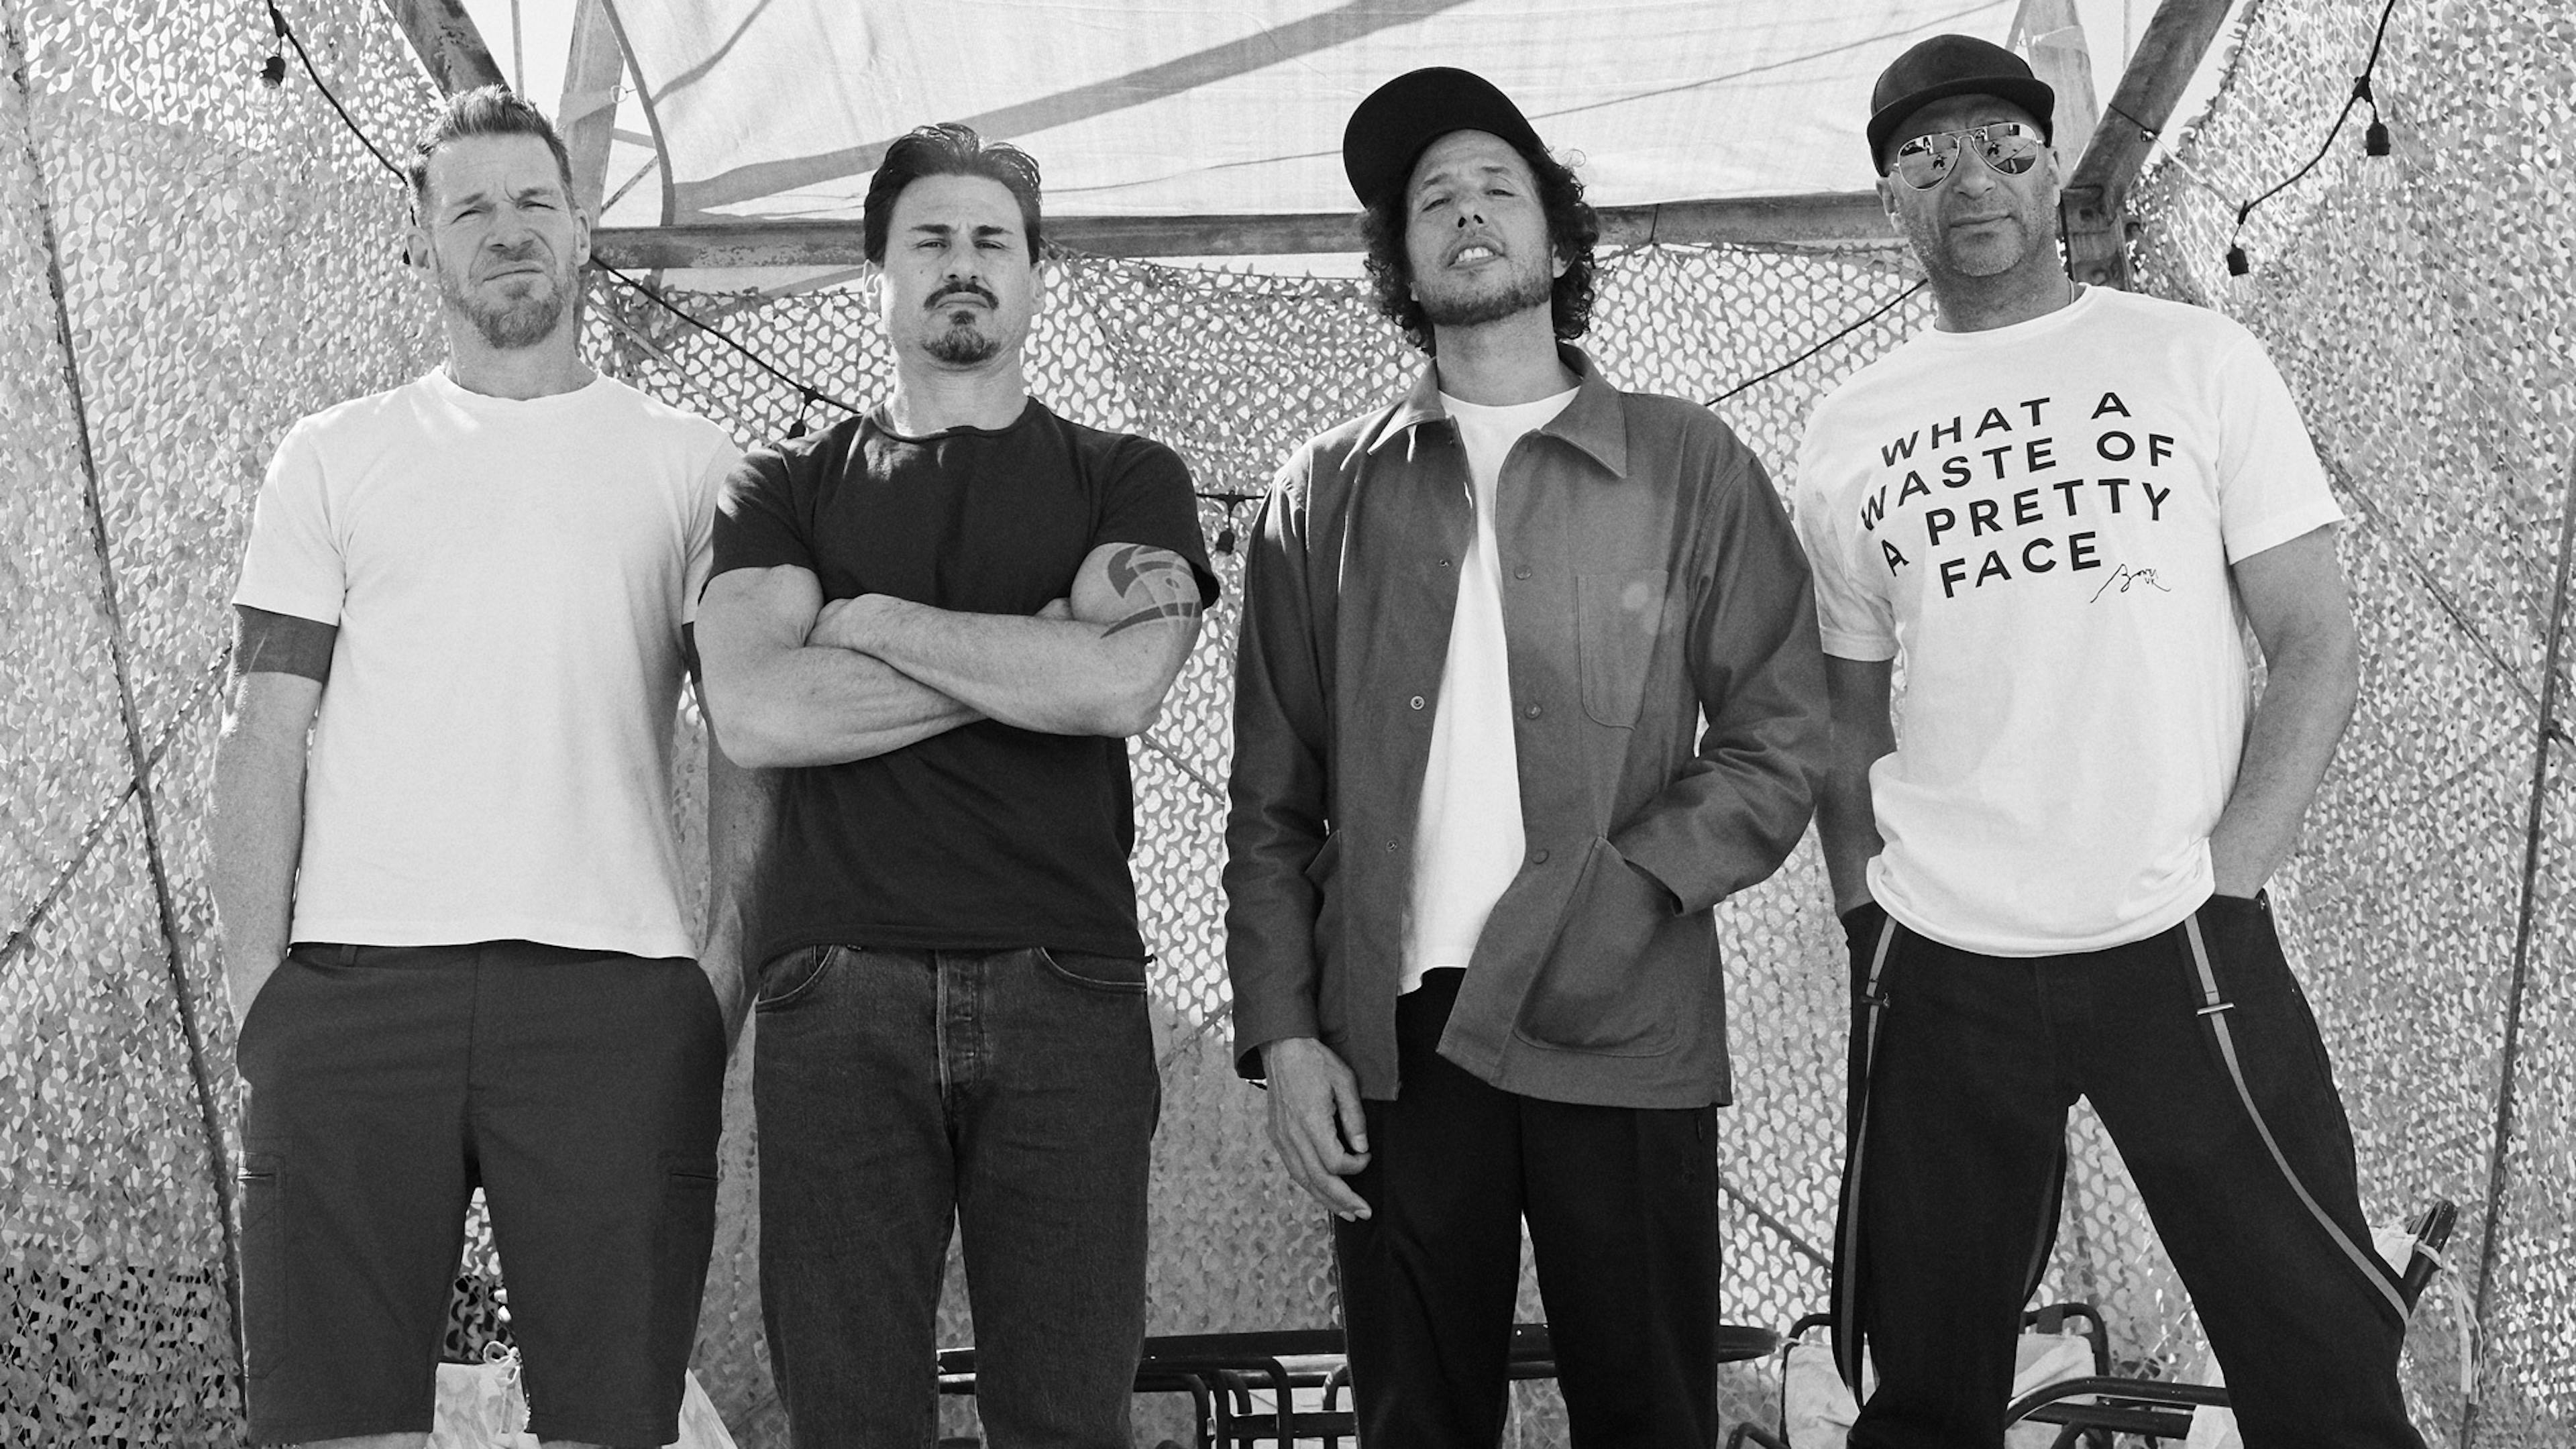 Rage Against The Machine Raise Over $3M For Charity Via Specially-Priced Tickets